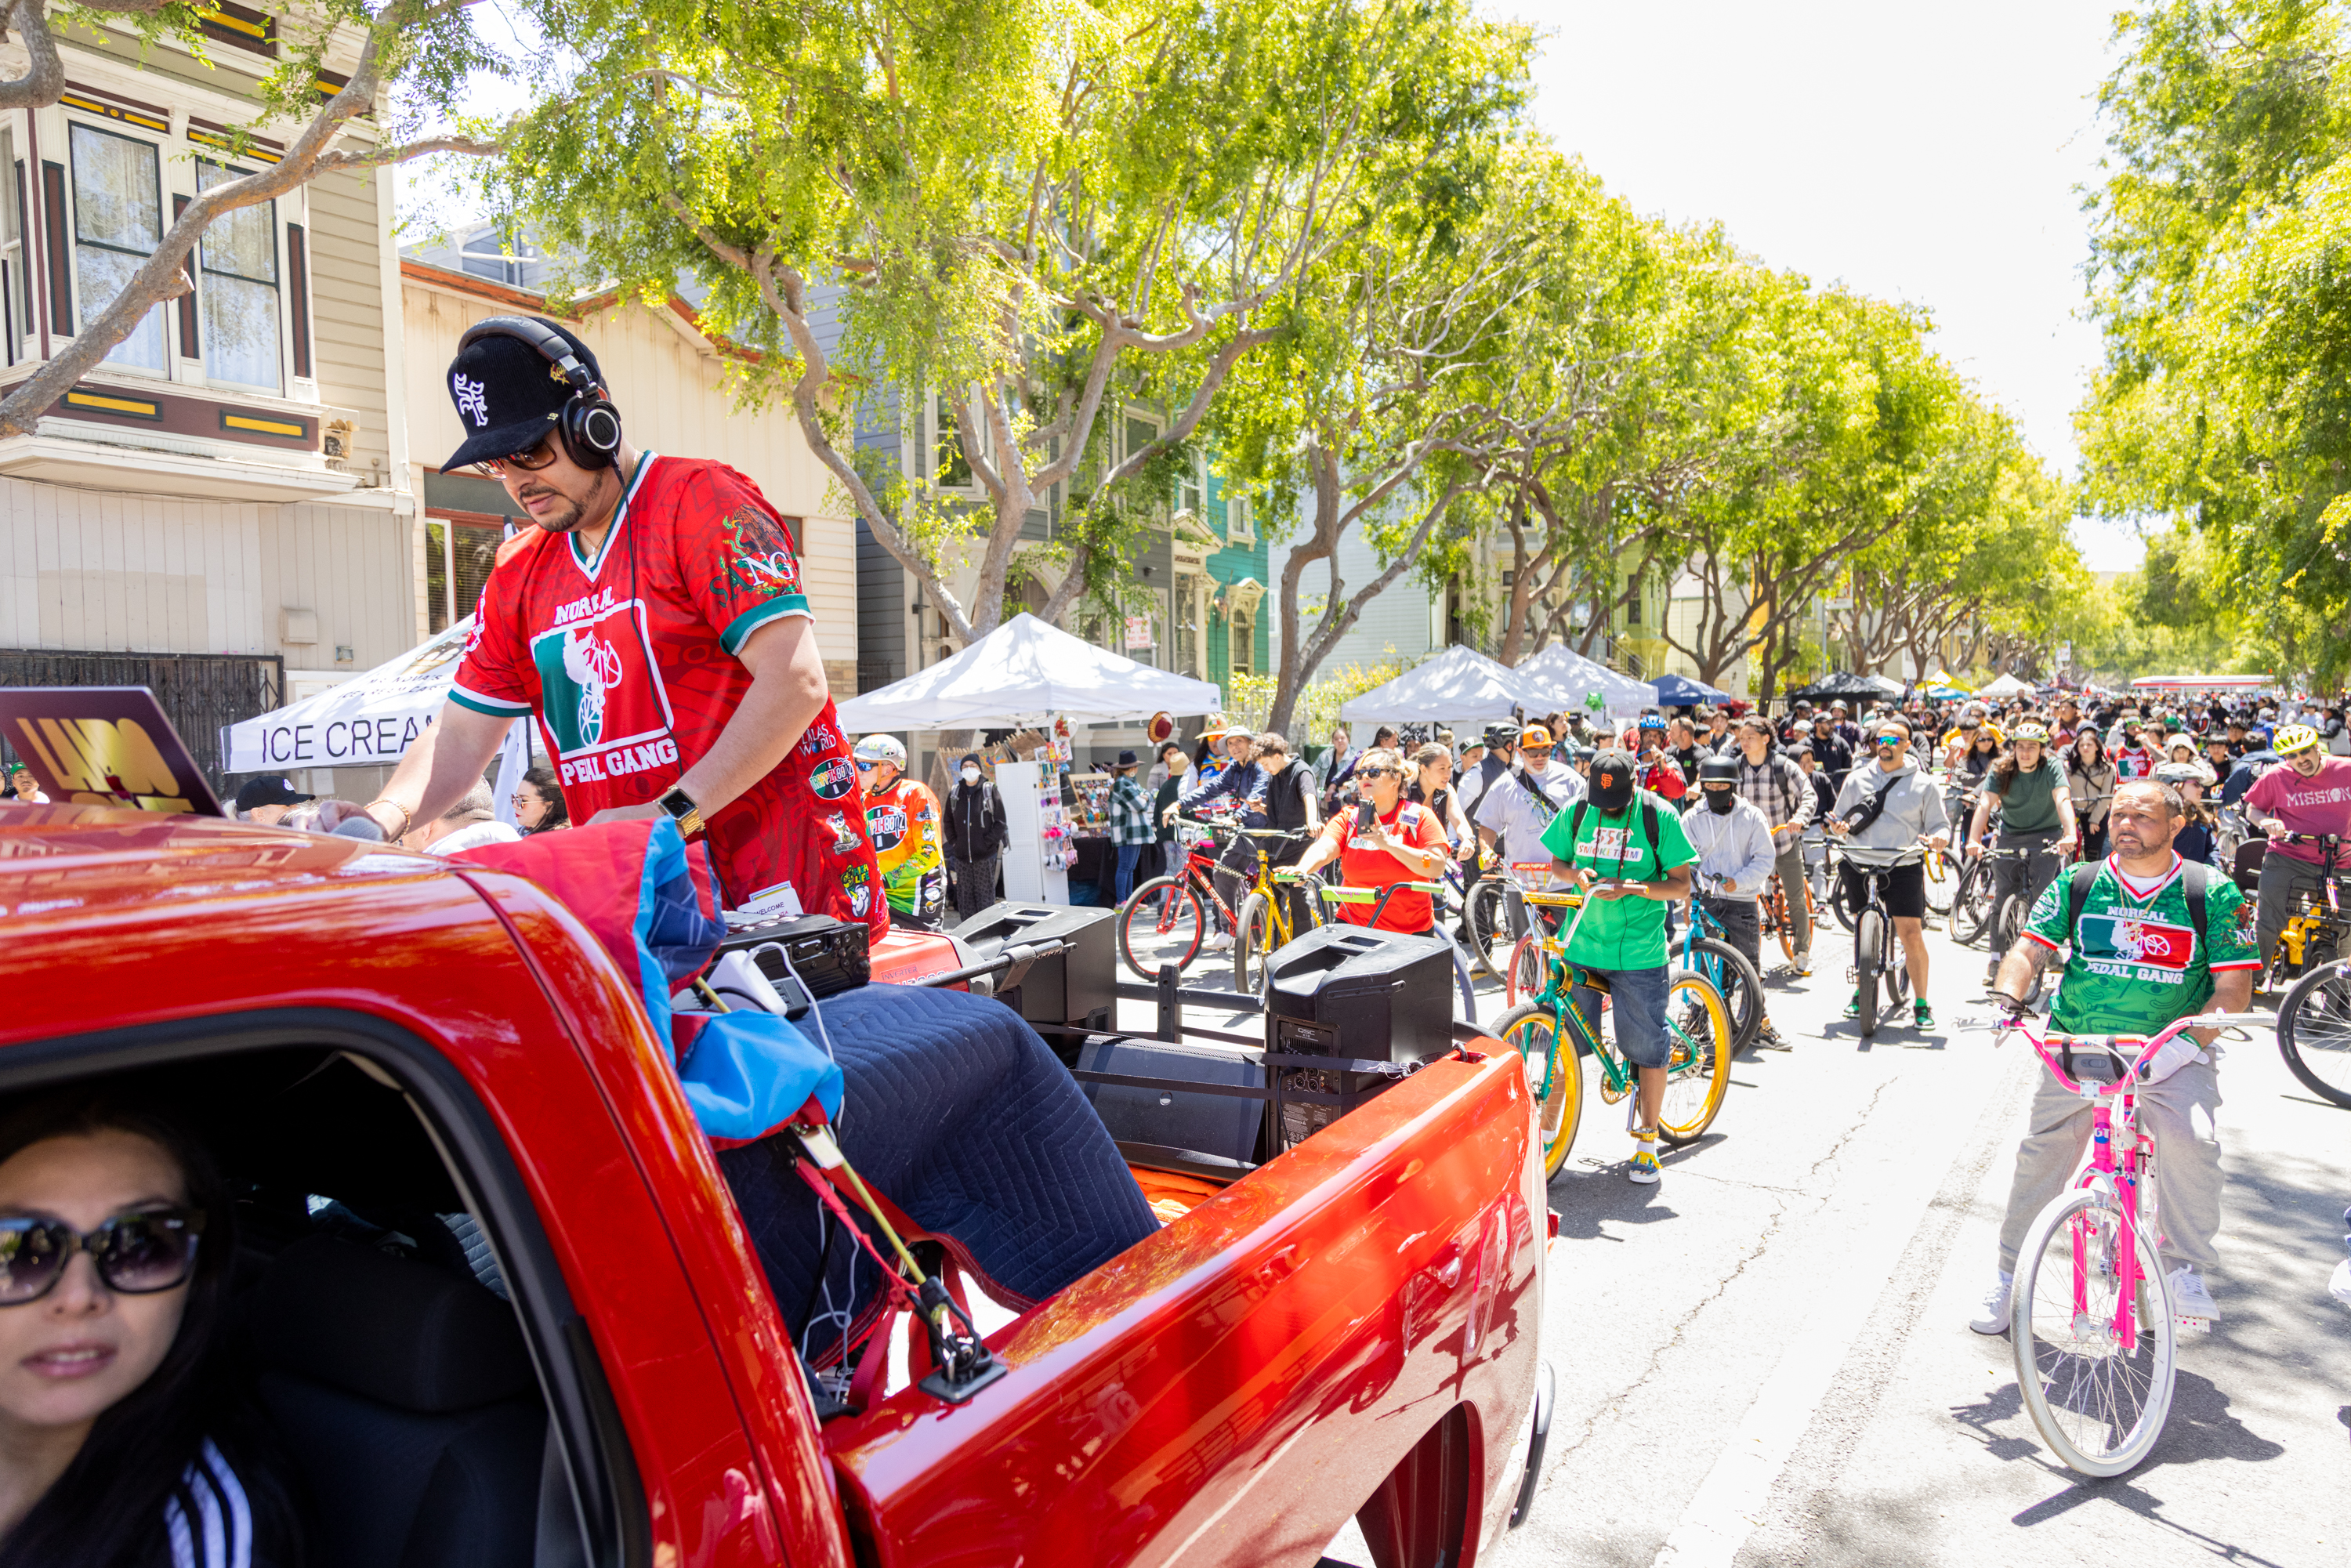 A DJ on a red truck plays music for a crowd of cyclists on a sunny street lined with trees and tents.